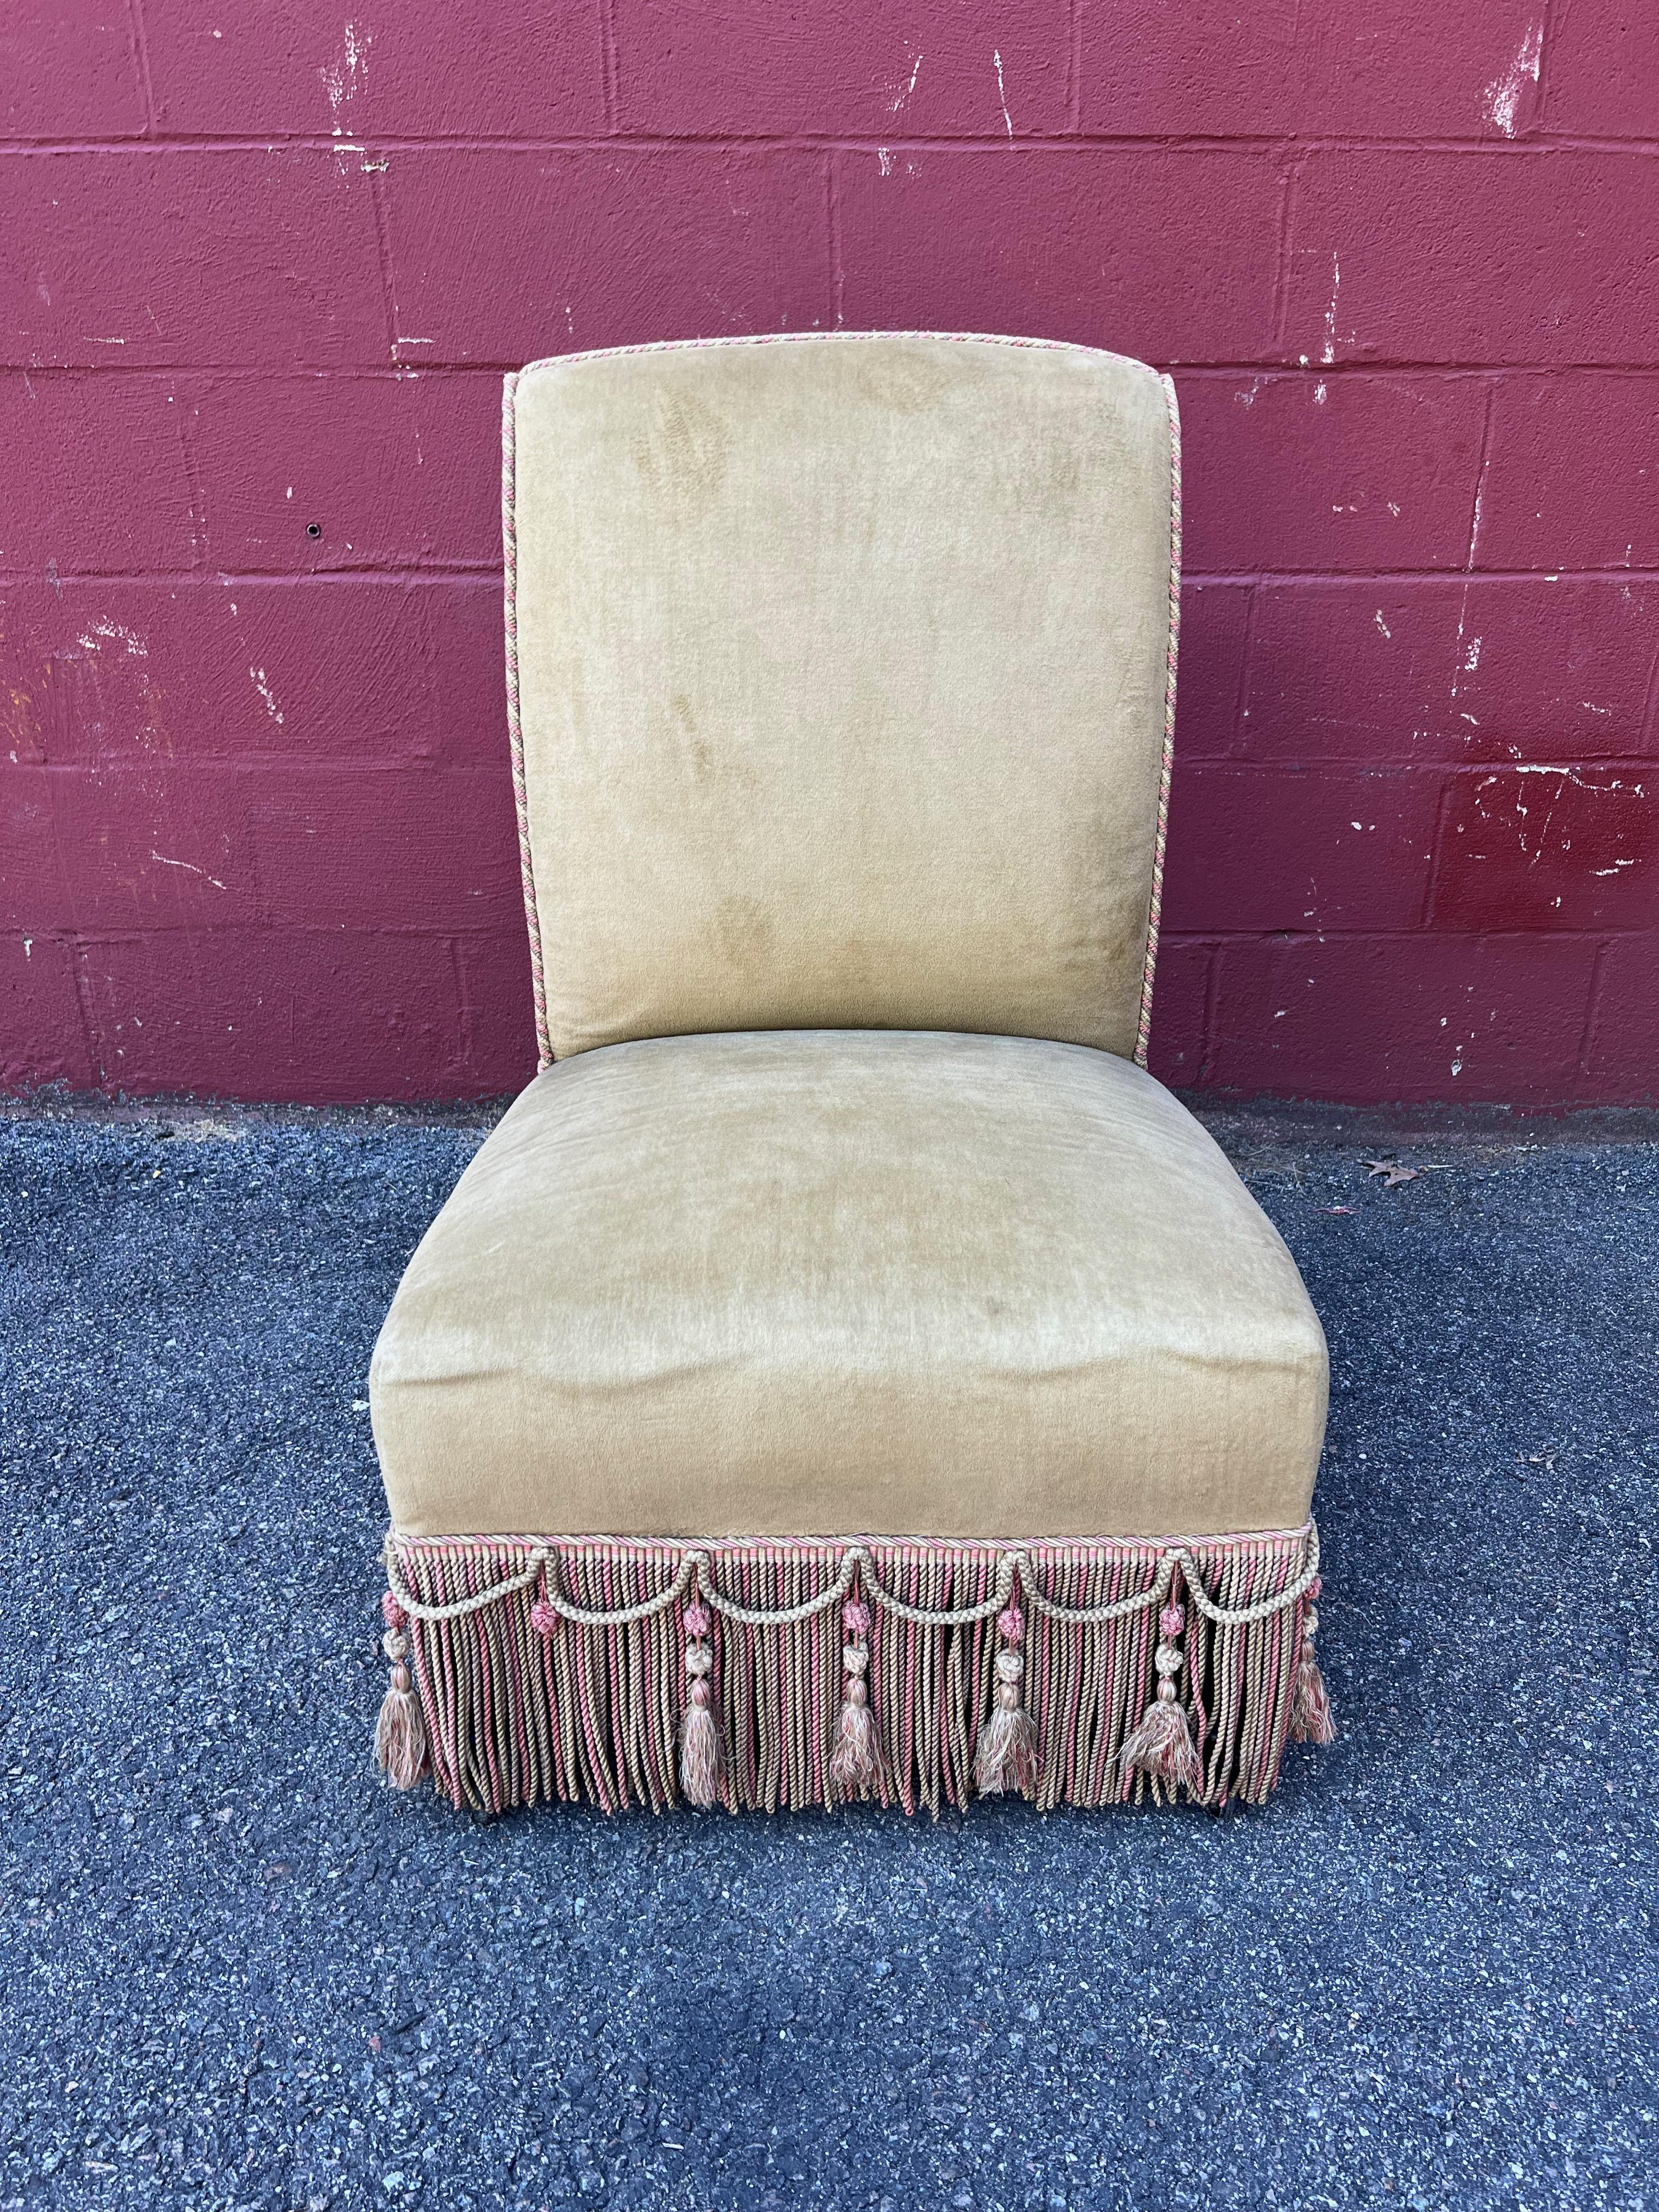 An outstanding large scale French 1920s Napoleon III style slipper chair. This slipper chair is truly magnificent. It is upholstered in a delightful pale tan velvet, and is ornamented with multicolored bullion fringe and tassels for added luxe